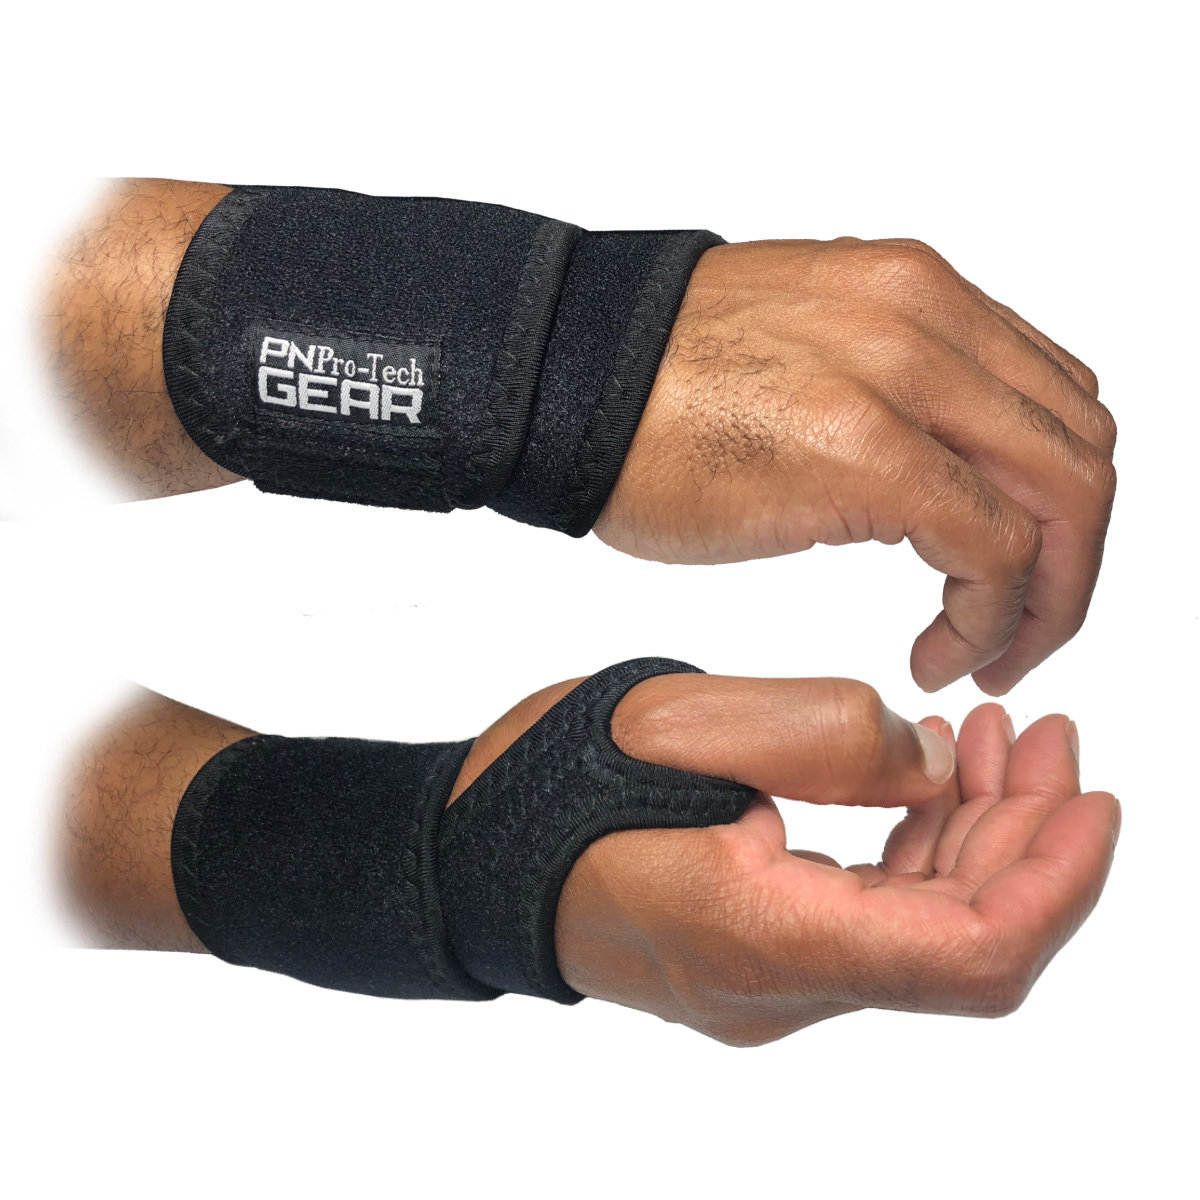 PN WRIST SUPPORT (WEAR WHILE YOU WORK) WEAR ON LEFT OR RIGHT HAND.